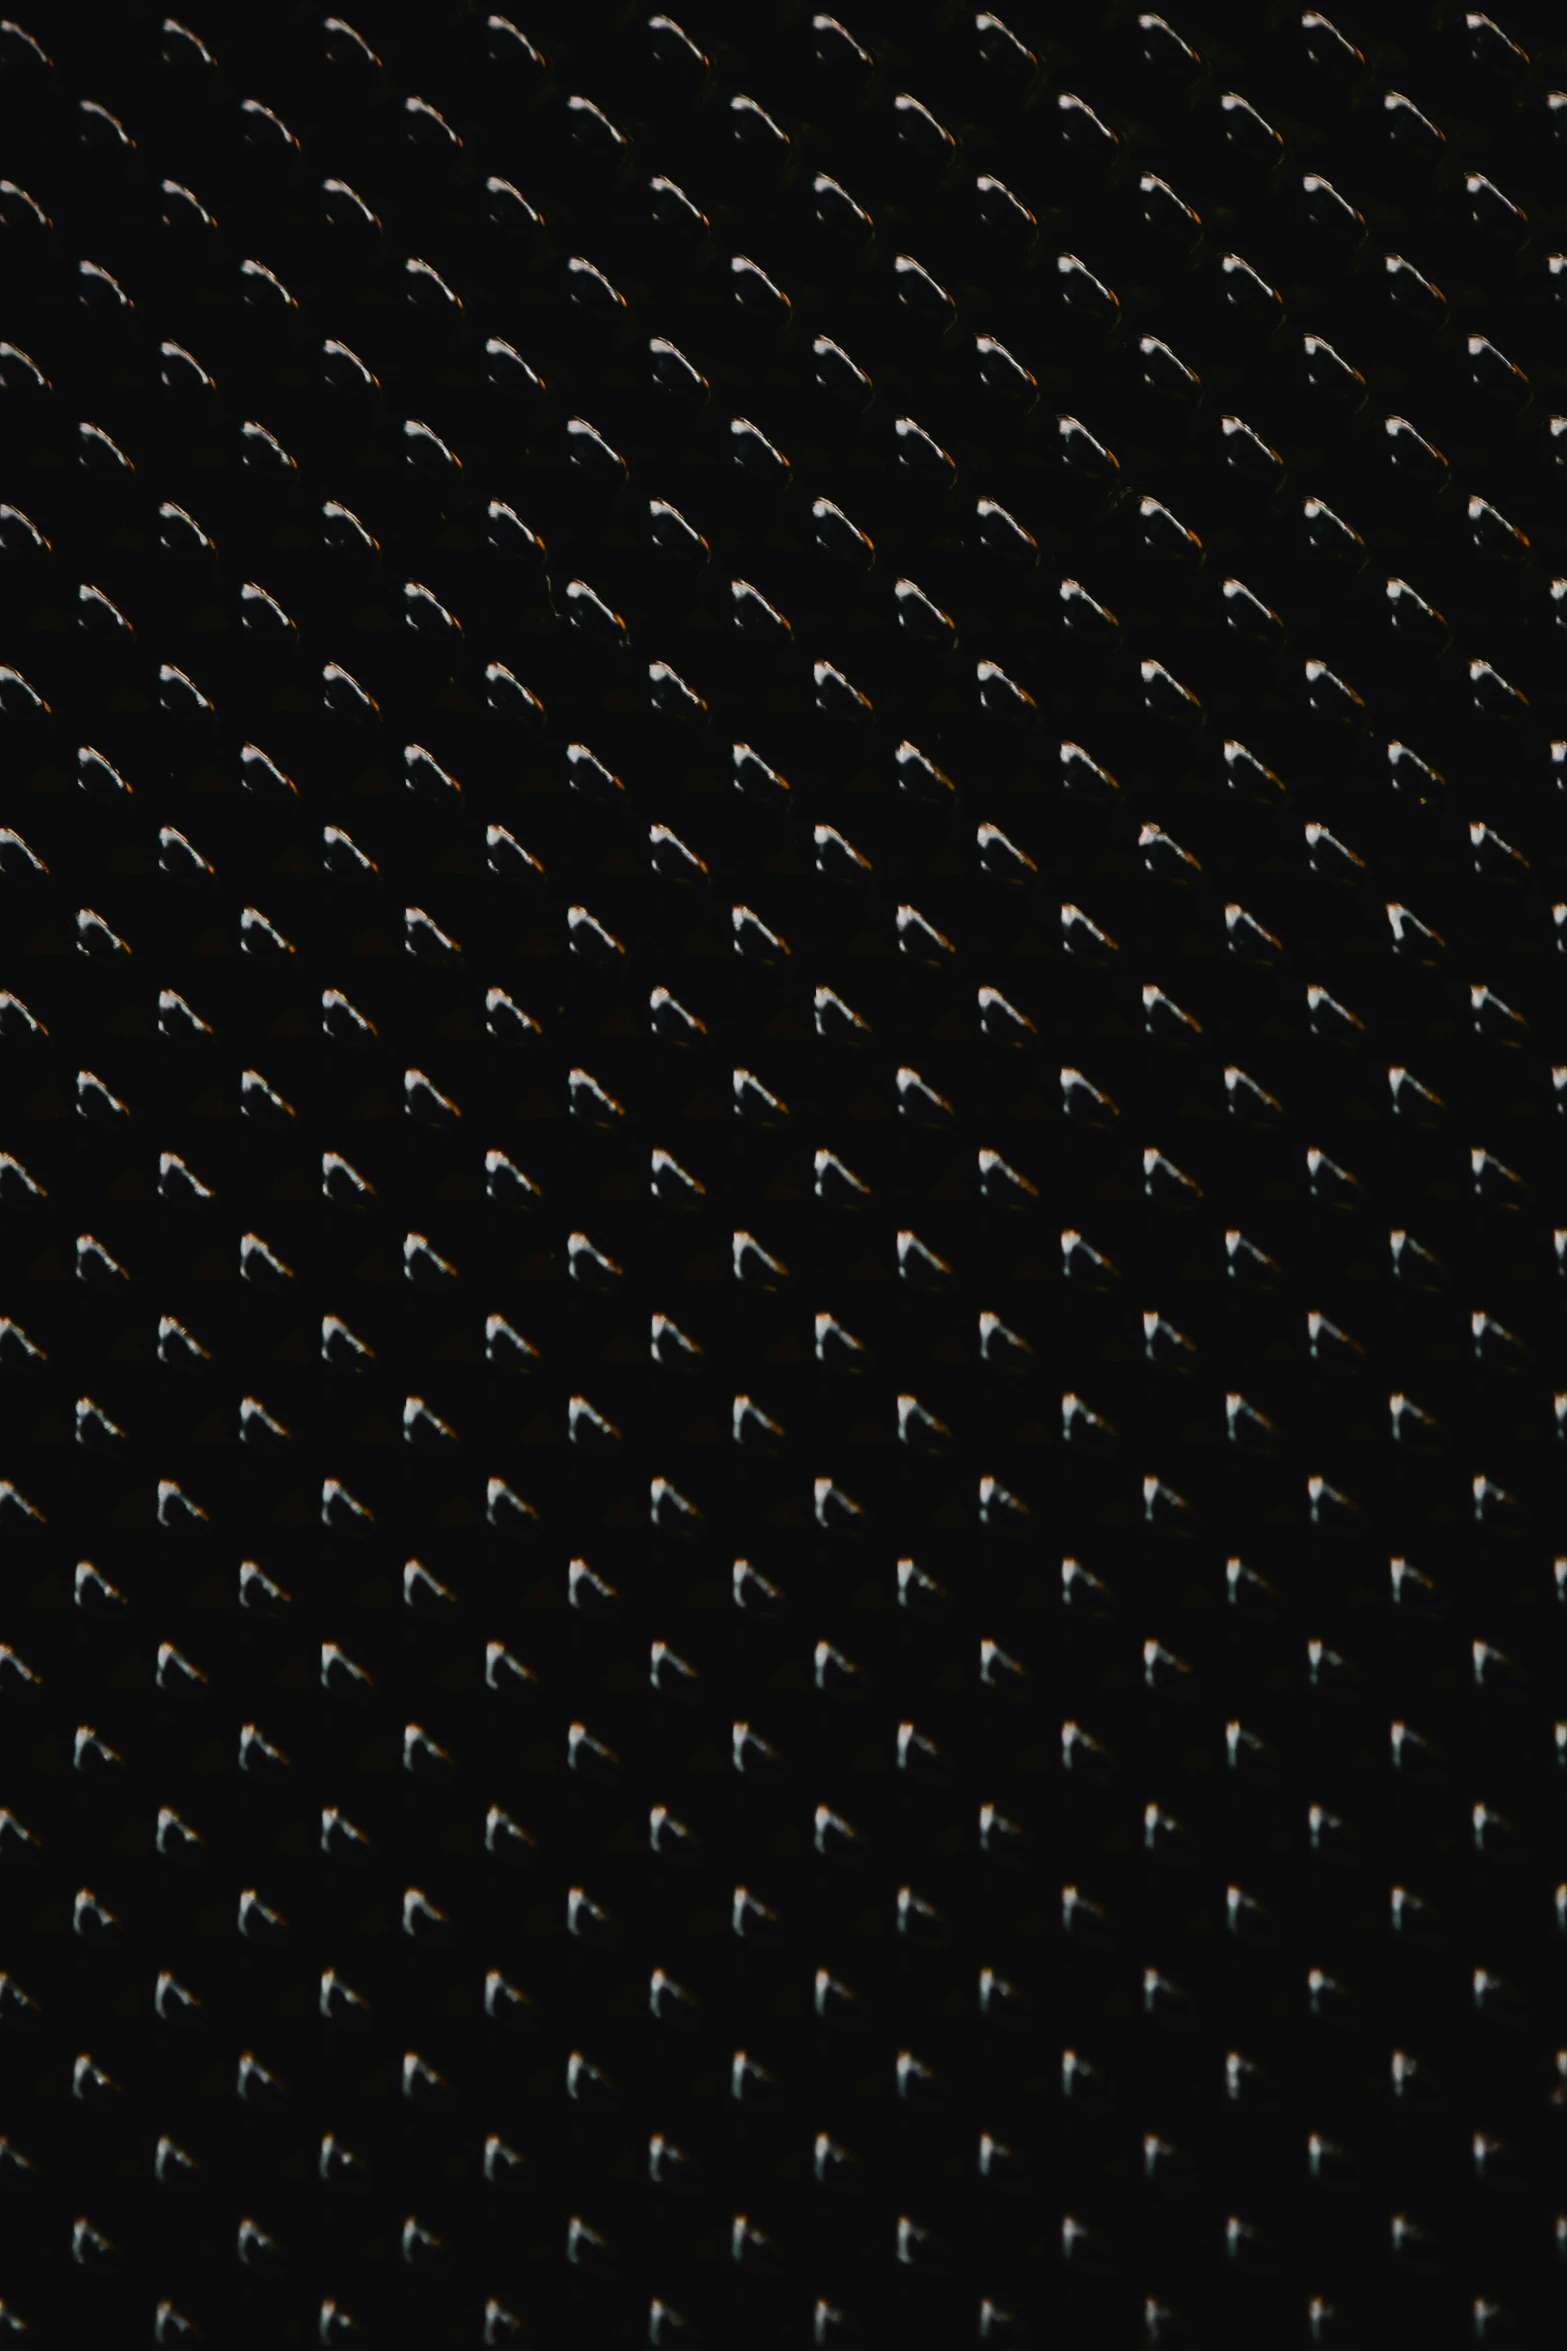 a tennis ball sitting on top of a tennis court, an album cover, reddit, op art, solid black #000000 background, dragon scales, black!!!!! background, nighttime